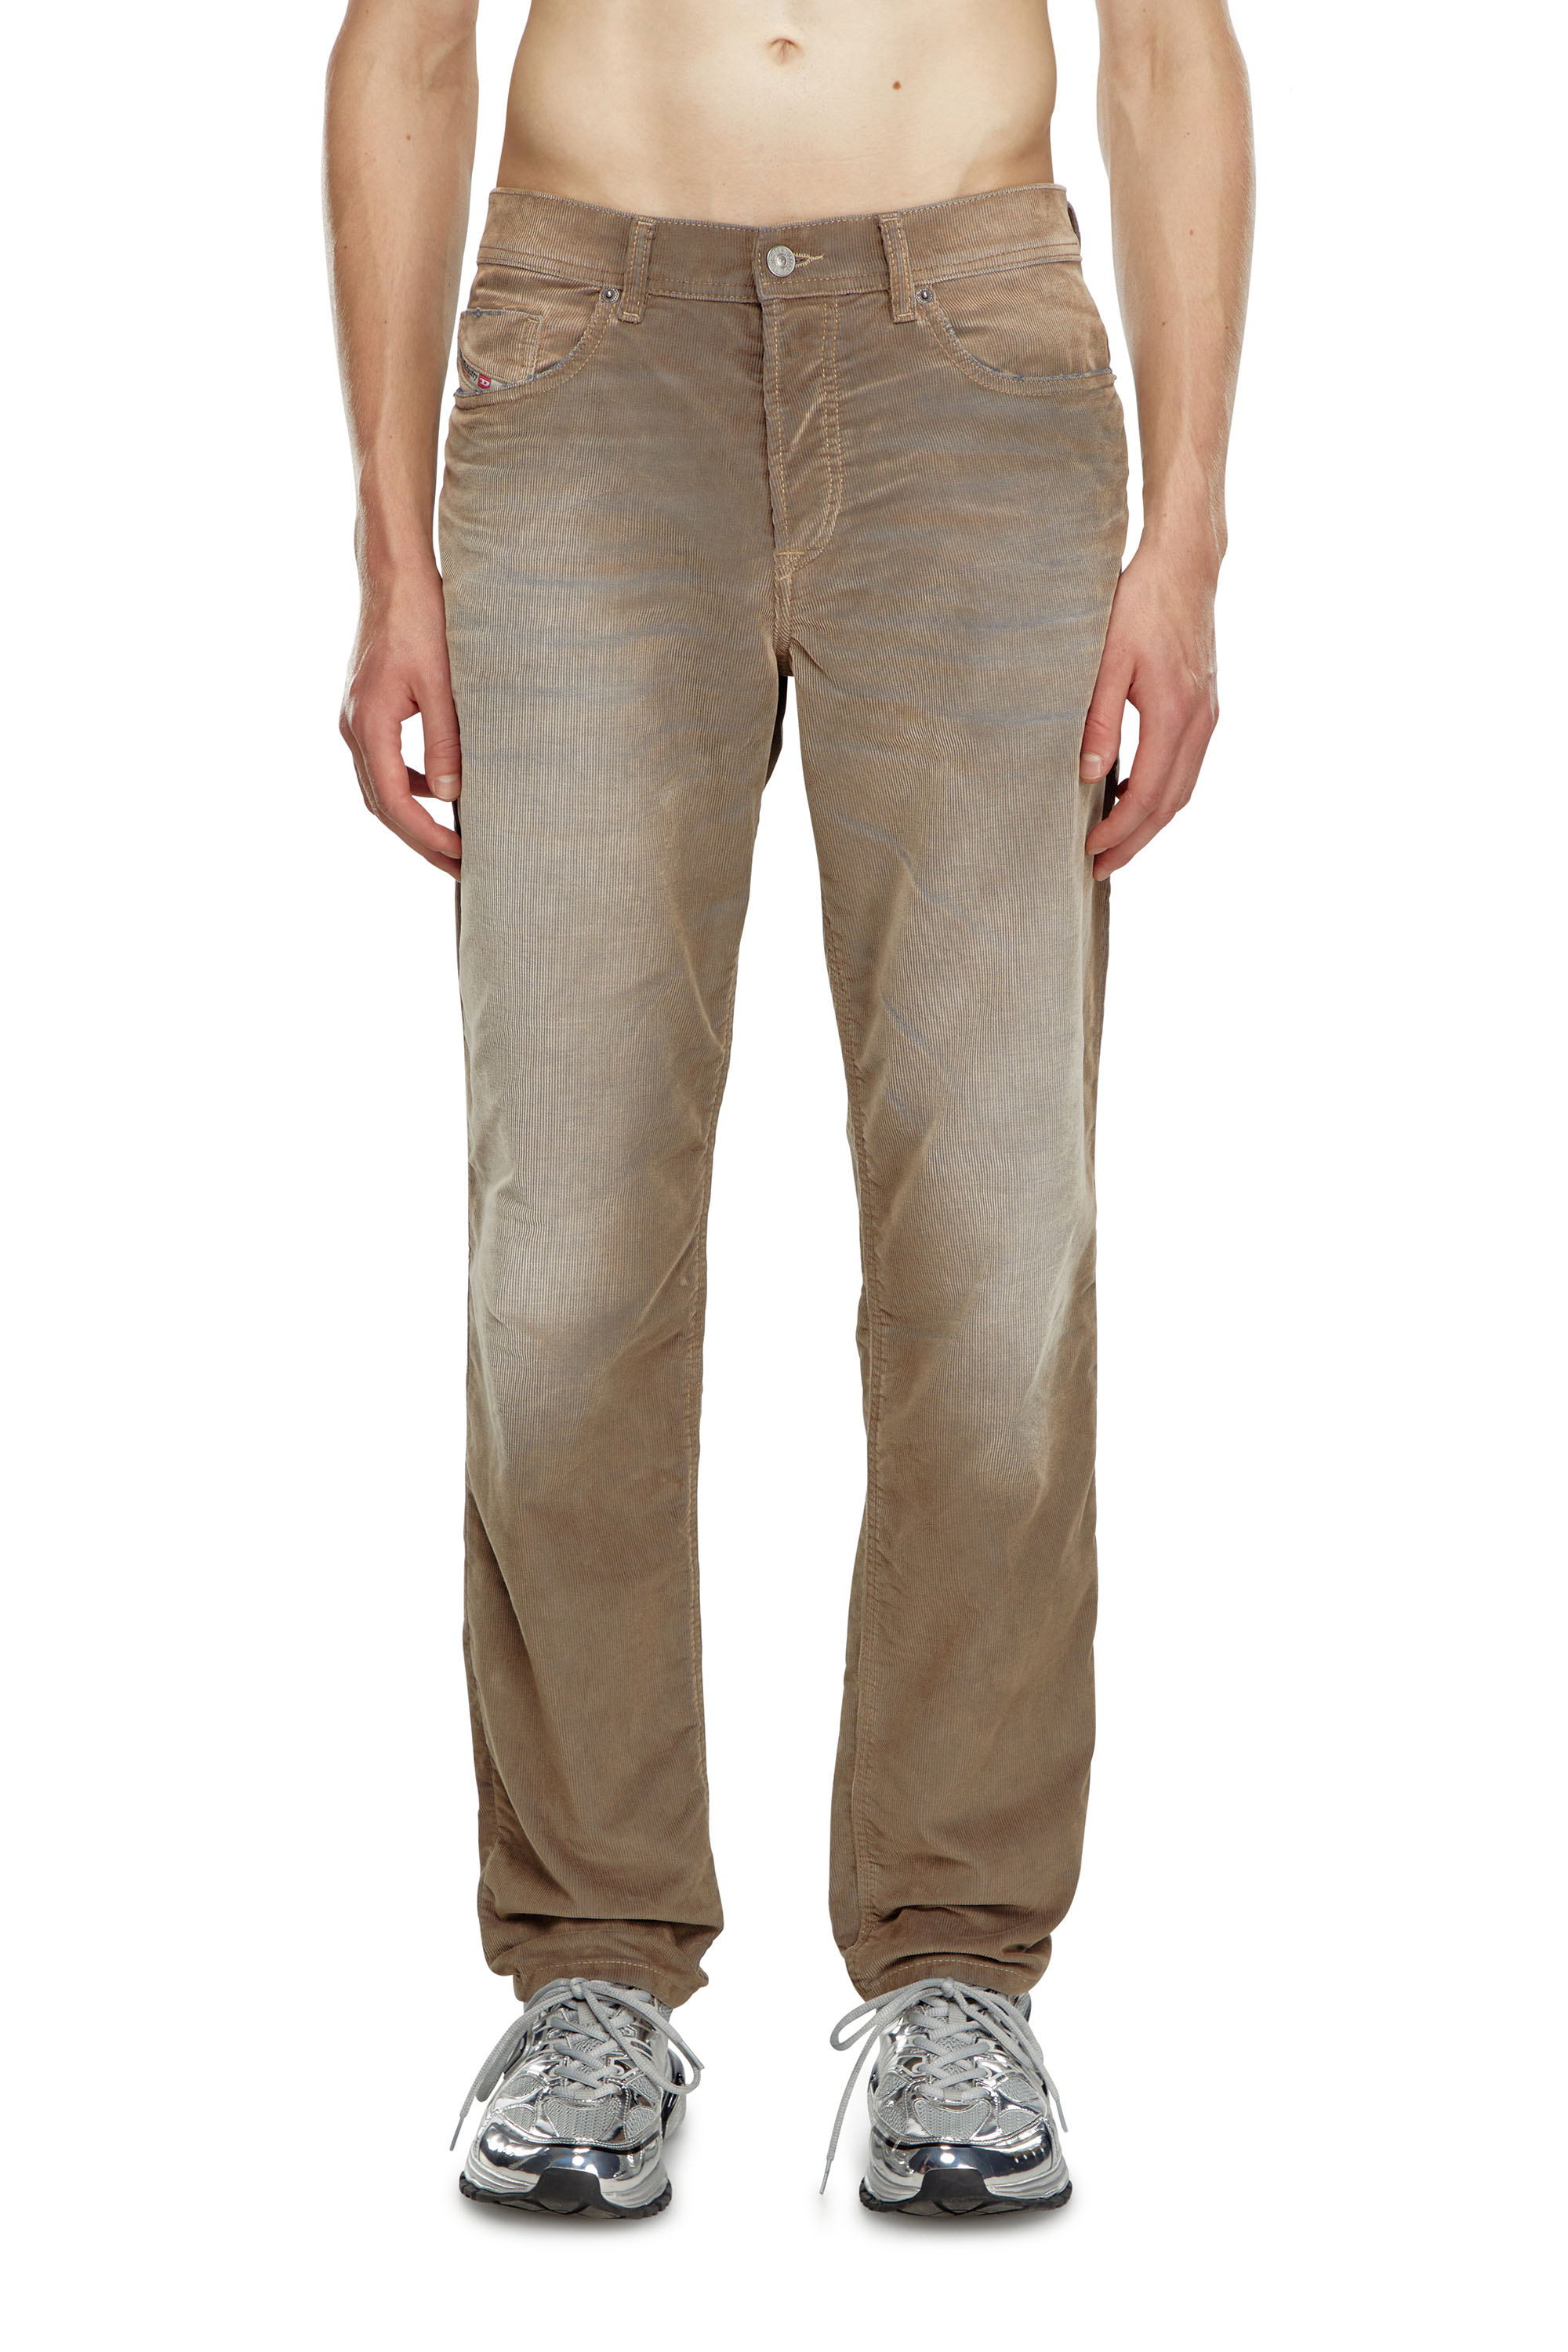 Diesel - Tapered Jeans 2023 D-Finitive 003II, Hombre Tapered Jeans - 2023 D-Finitive in Gris - Image 1